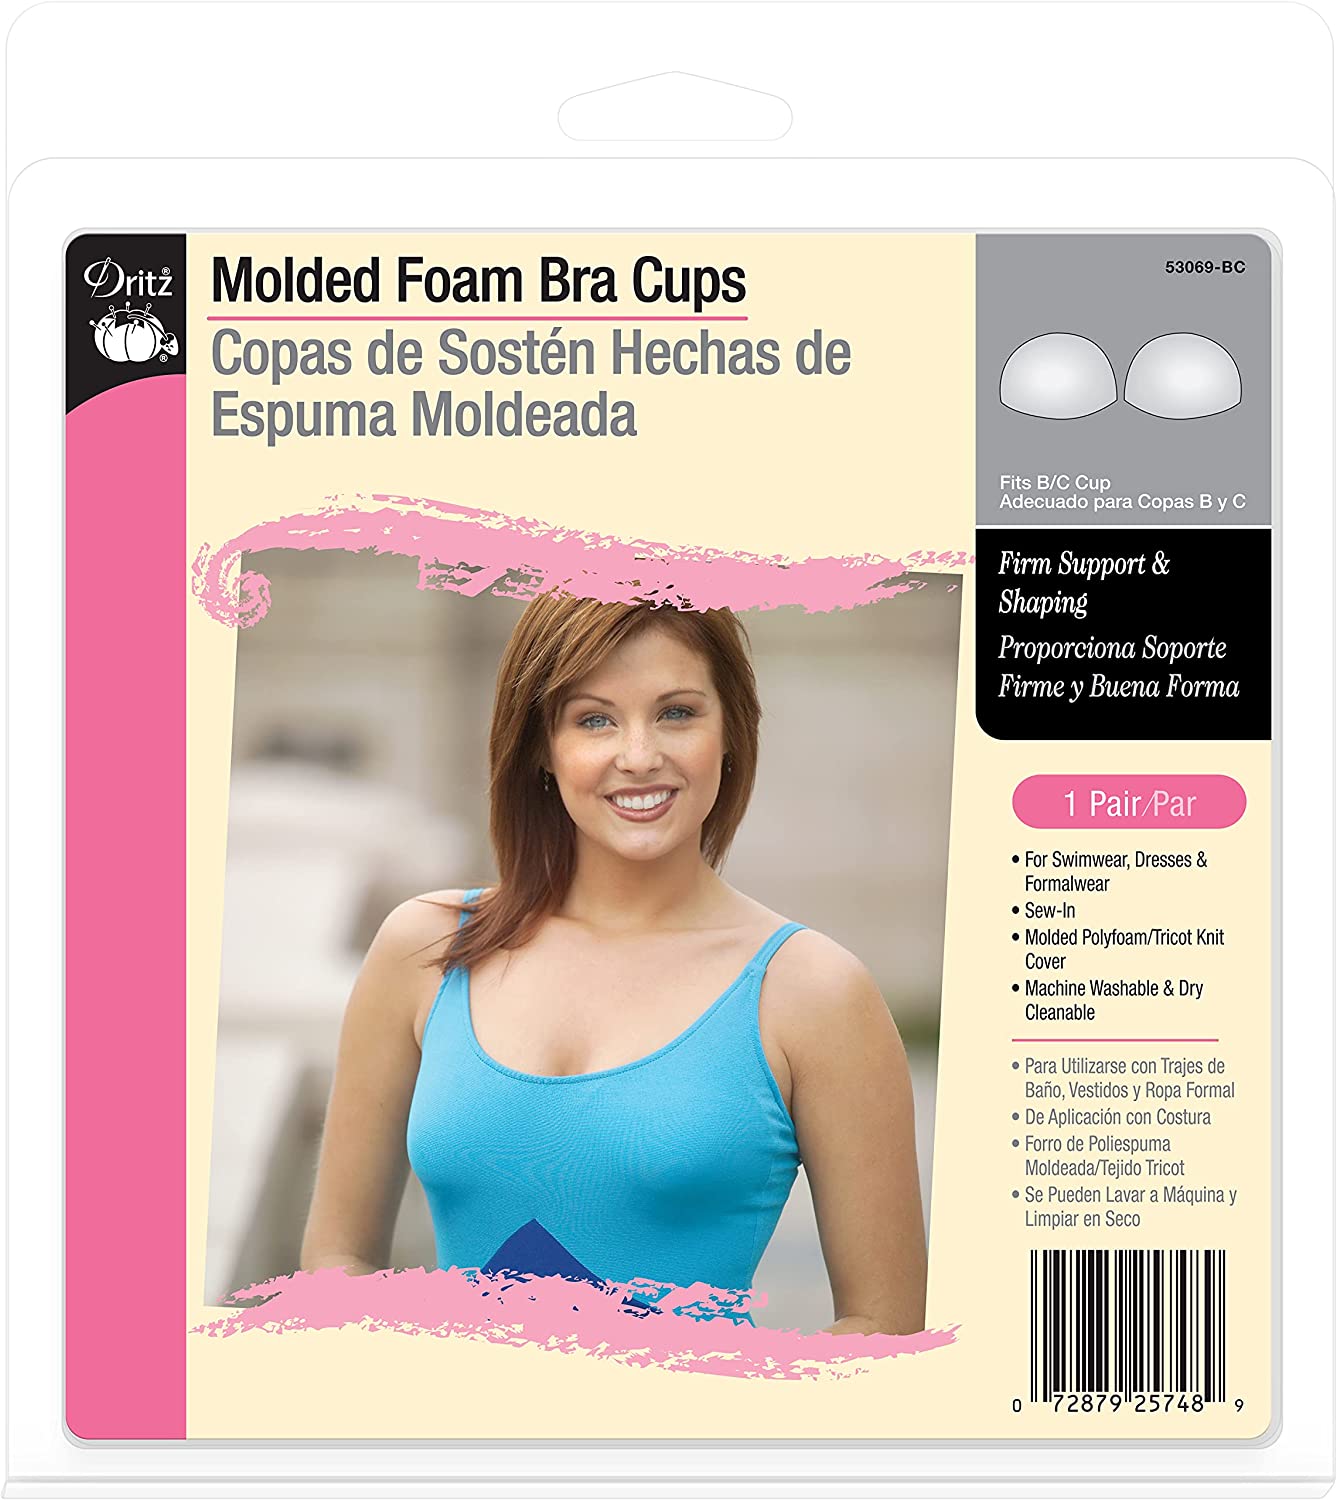 The Dritz Molded Foam Bra Cups Ddd is the perfect way to tastefully flatter full-figure silhouettes in women apparel. Made of molded polyfoam, these tricot-covered sew-in bra cups offer perfect support and definition in any apparel. Use them in formal wear, casual dresses, tank tops or even swim wear. Machine washable and dry cleanable, these bra cups are suitable for use with most fabric types.